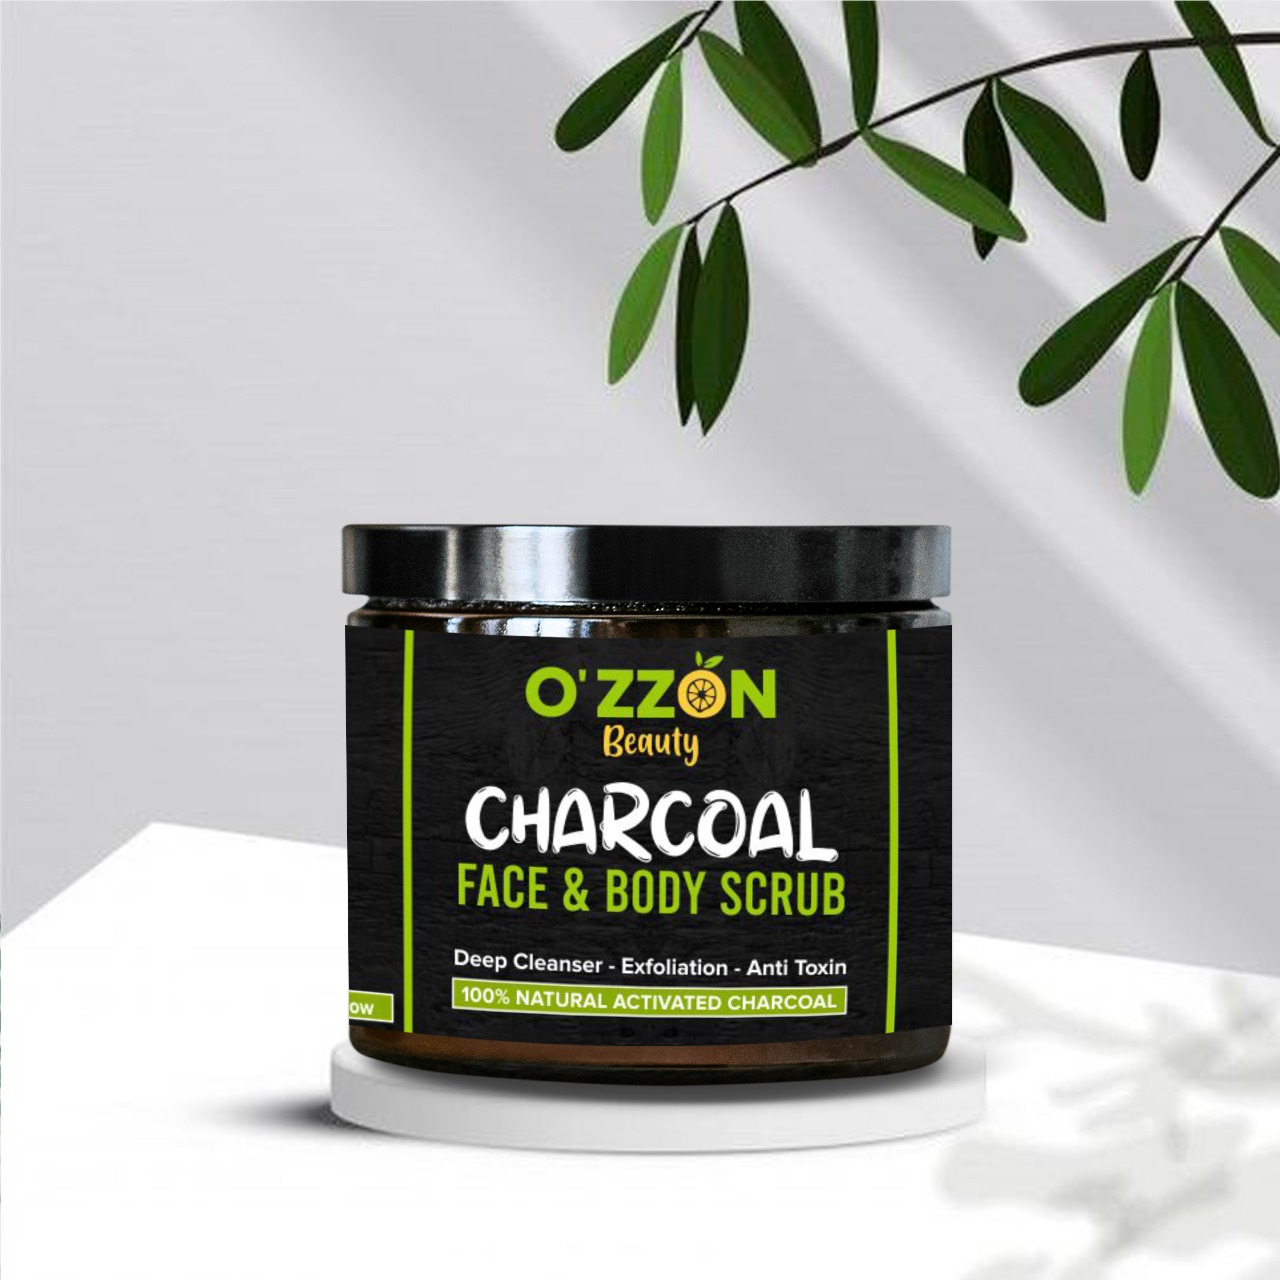 Online Shopping India, Ozzon Products, Charcoal Face & Body Scrub, Ozzon,